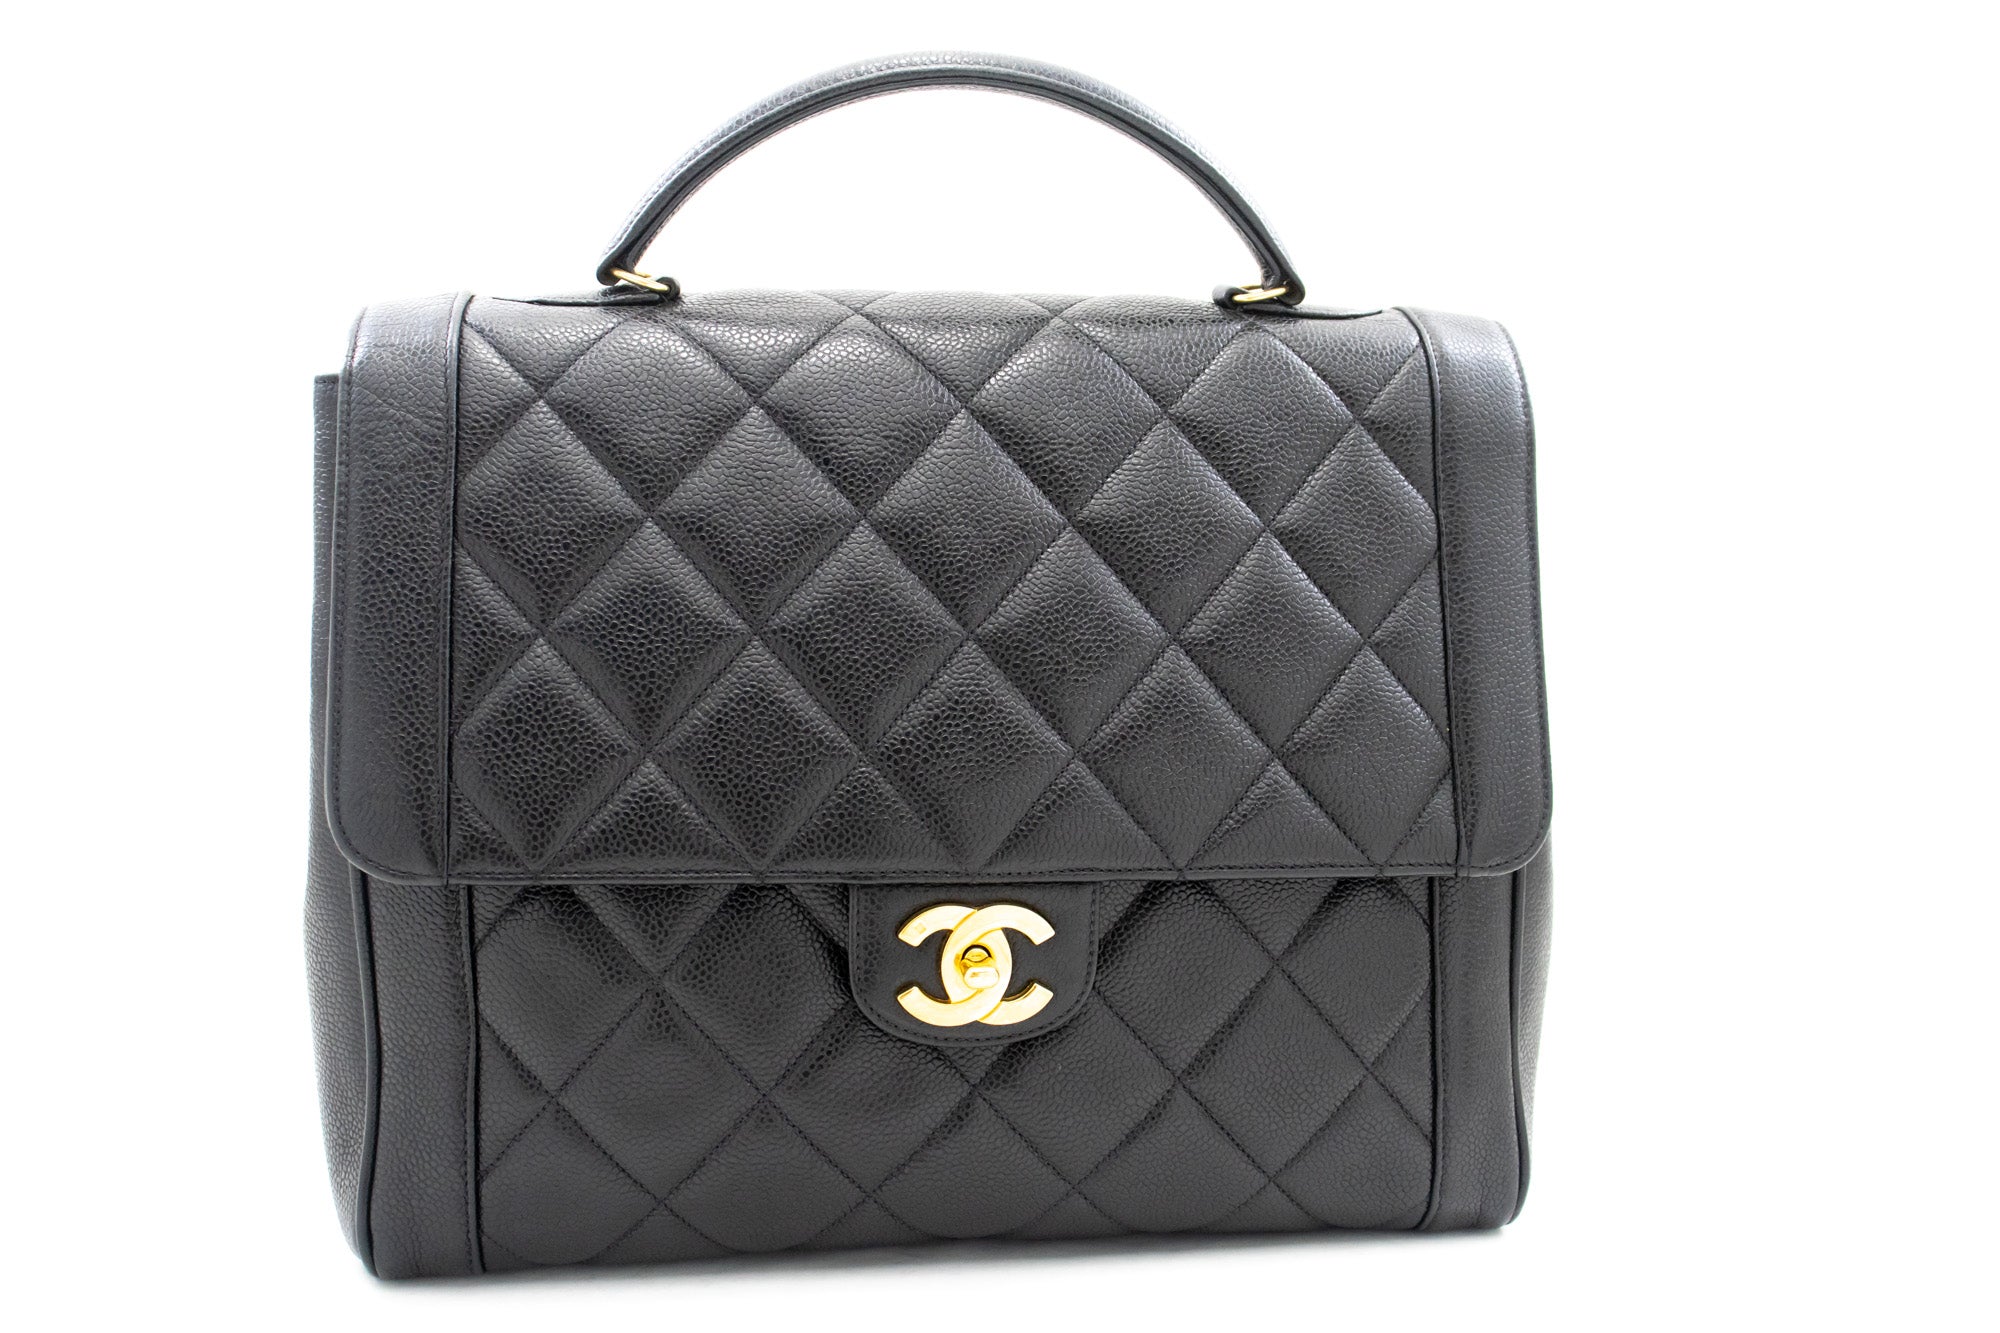 Everything You Need to Know About the New 23K Chanel Kelly Shopper Bag -  Academy by FASHIONPHILE